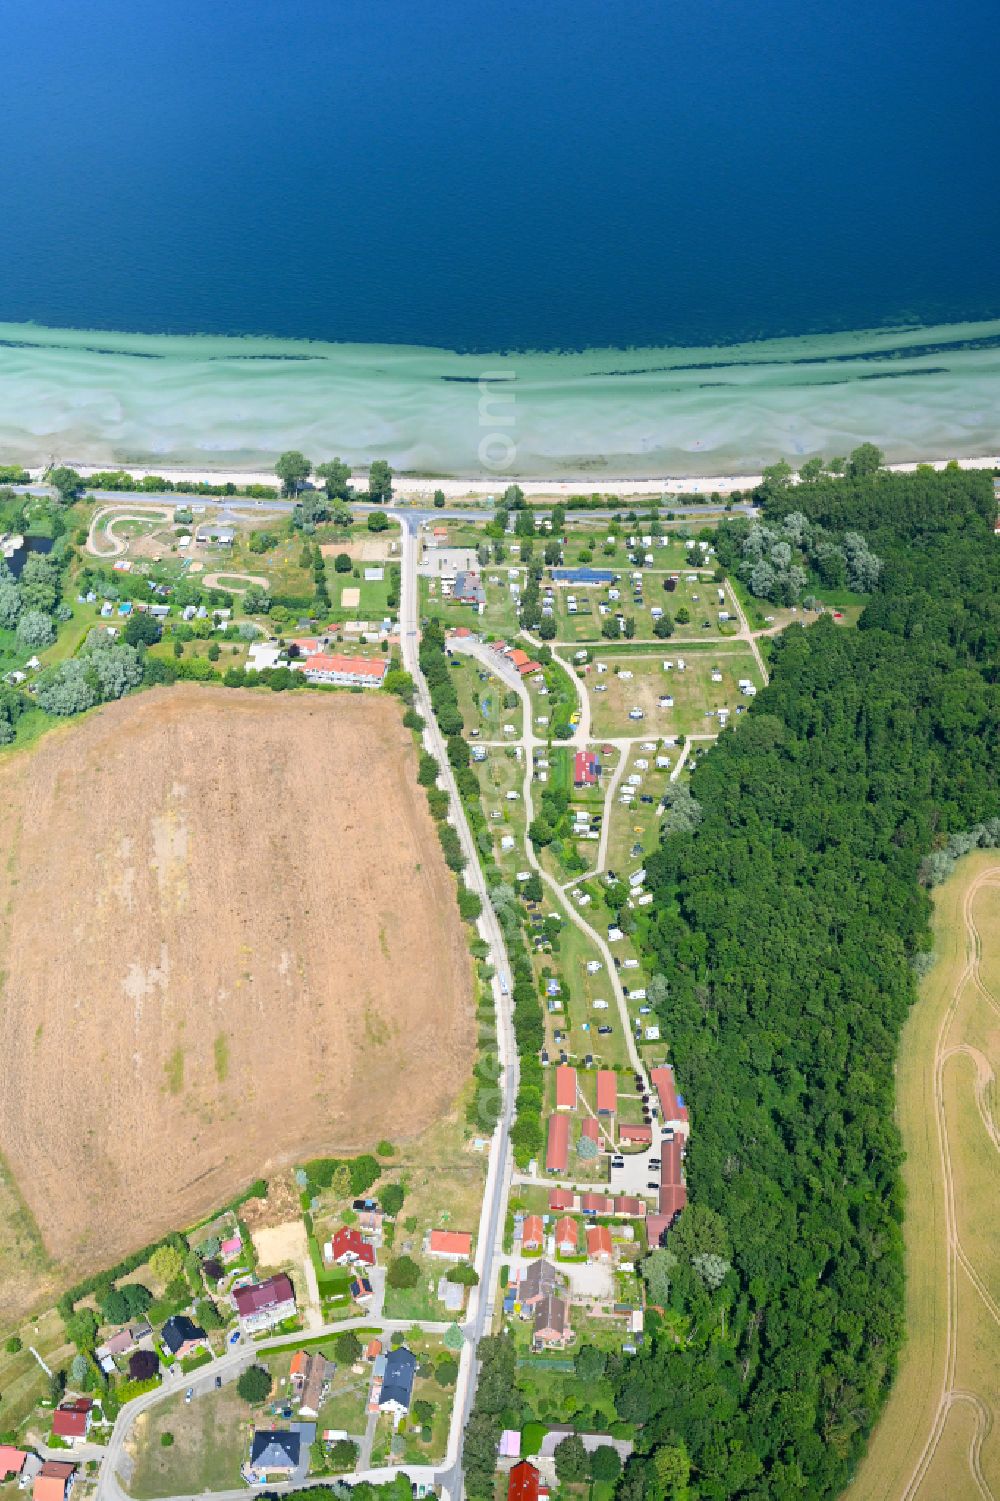 Niendorf from above - Campsite with caravans and tents in the coastal area Campingplatz Ostseequelle on street Strandstrasse in Niendorf at the baltic sea coast in the state Mecklenburg - Western Pomerania, Germany